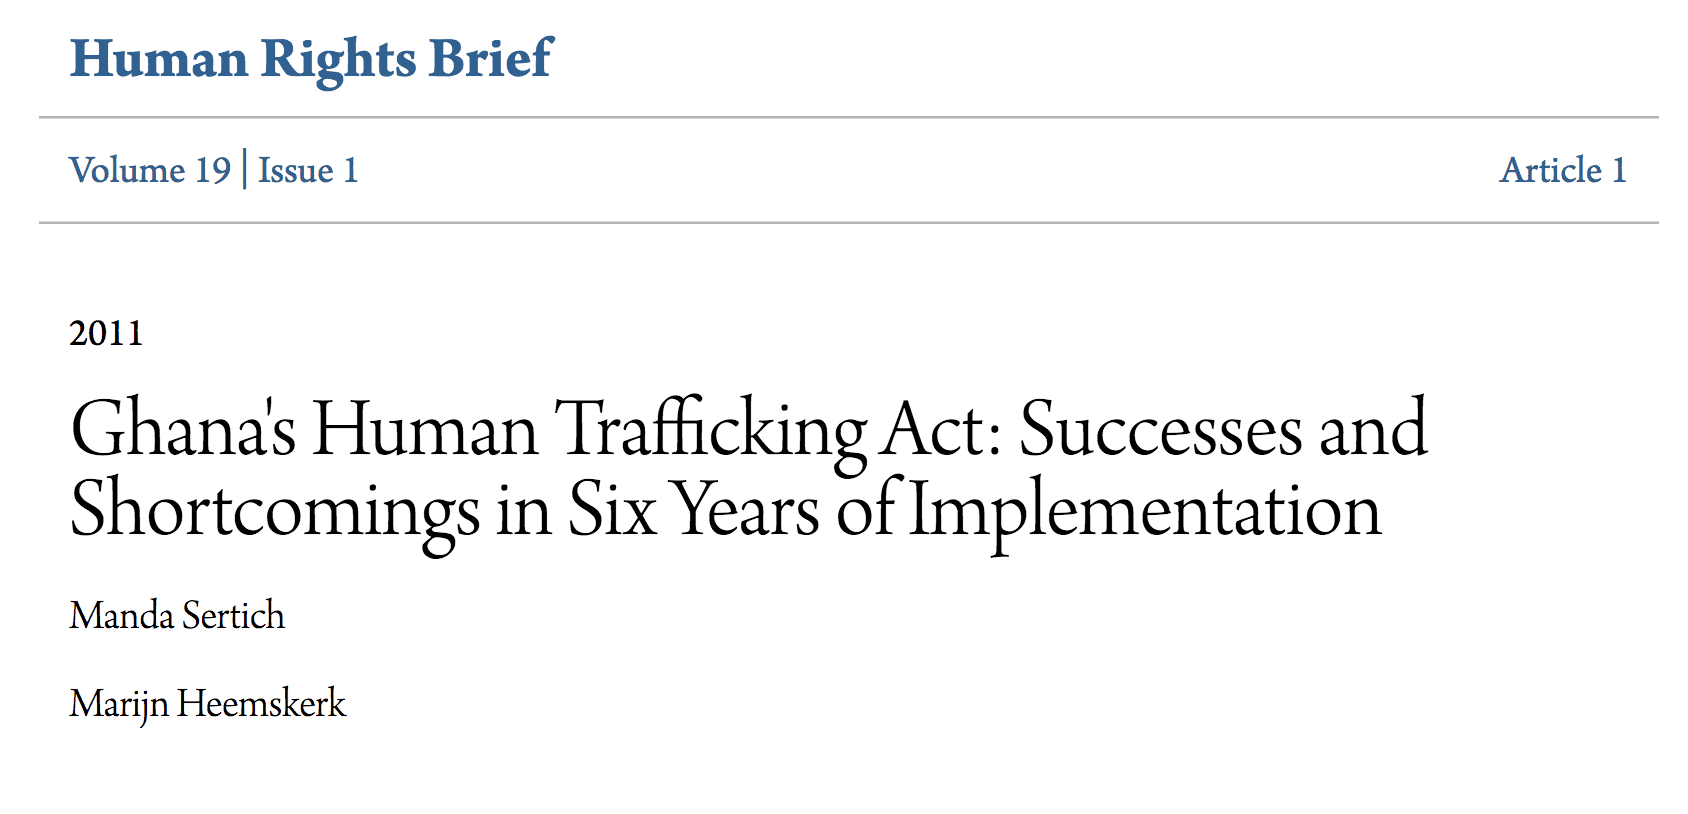 Ghana’s Human Trafficking Act: Successes and Shortcomings in Six Years of Implementation